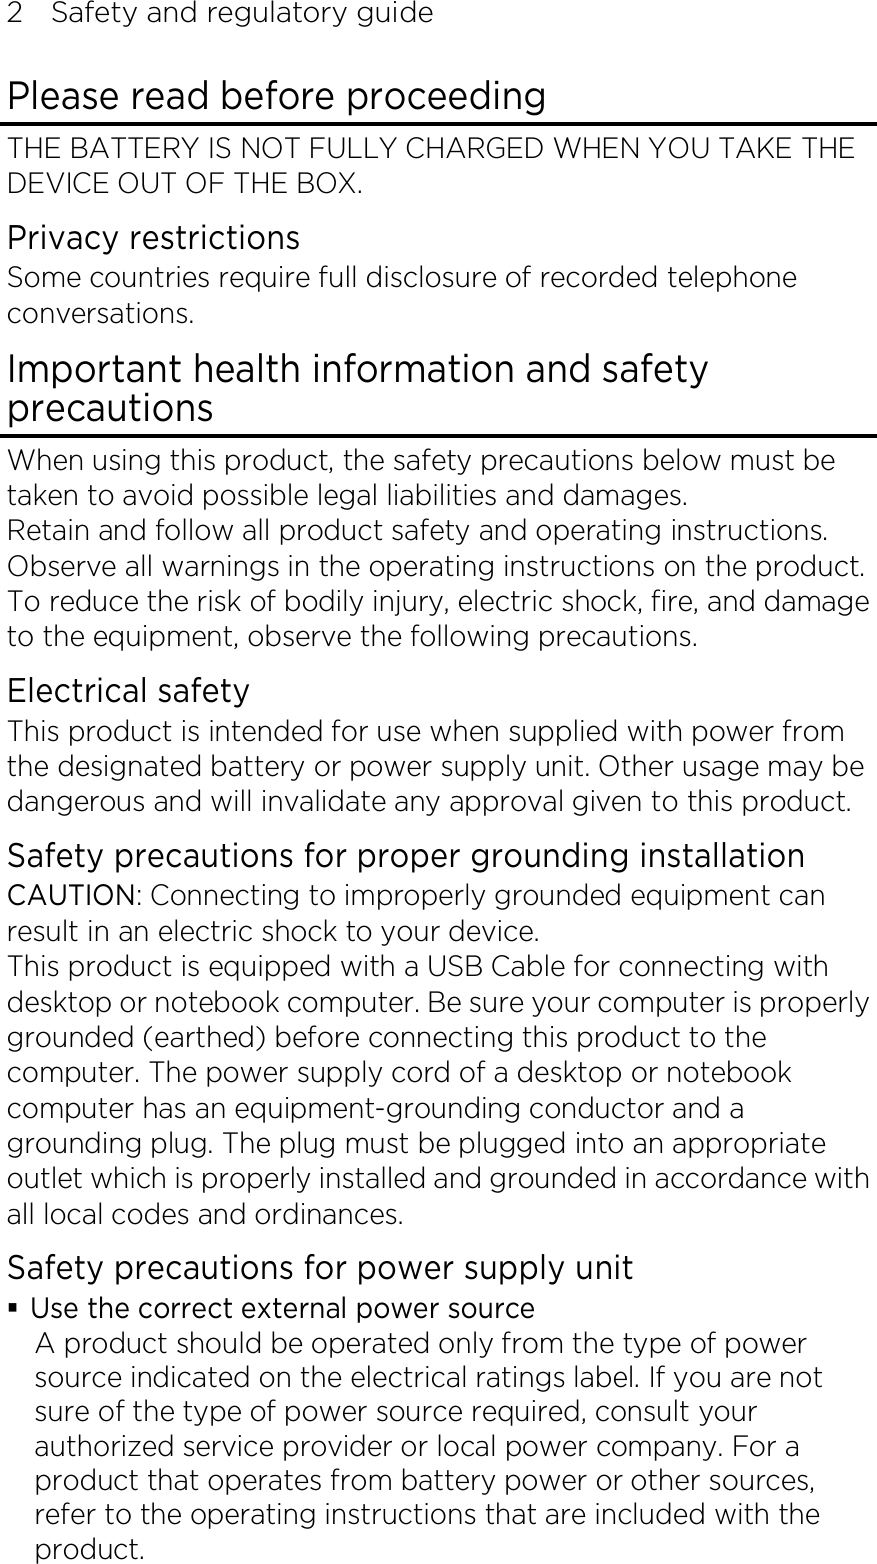 2    Safety and regulatory guide Please read before proceeding THE BATTERY IS NOT FULLY CHARGED WHEN YOU TAKE THE DEVICE OUT OF THE BOX. Privacy restrictions Some countries require full disclosure of recorded telephone conversations. Important health information and safety precautions When using this product, the safety precautions below must be taken to avoid possible legal liabilities and damages. Retain and follow all product safety and operating instructions. Observe all warnings in the operating instructions on the product. To reduce the risk of bodily injury, electric shock, fire, and damage to the equipment, observe the following precautions. Electrical safety This product is intended for use when supplied with power from the designated battery or power supply unit. Other usage may be dangerous and will invalidate any approval given to this product. Safety precautions for proper grounding installation CAUTION: Connecting to improperly grounded equipment can result in an electric shock to your device. This product is equipped with a USB Cable for connecting with desktop or notebook computer. Be sure your computer is properly grounded (earthed) before connecting this product to the computer. The power supply cord of a desktop or notebook computer has an equipment-grounding conductor and a grounding plug. The plug must be plugged into an appropriate outlet which is properly installed and grounded in accordance with all local codes and ordinances. Safety precautions for power supply unit  Use the correct external power source A product should be operated only from the type of power source indicated on the electrical ratings label. If you are not sure of the type of power source required, consult your authorized service provider or local power company. For a product that operates from battery power or other sources, refer to the operating instructions that are included with the product. 